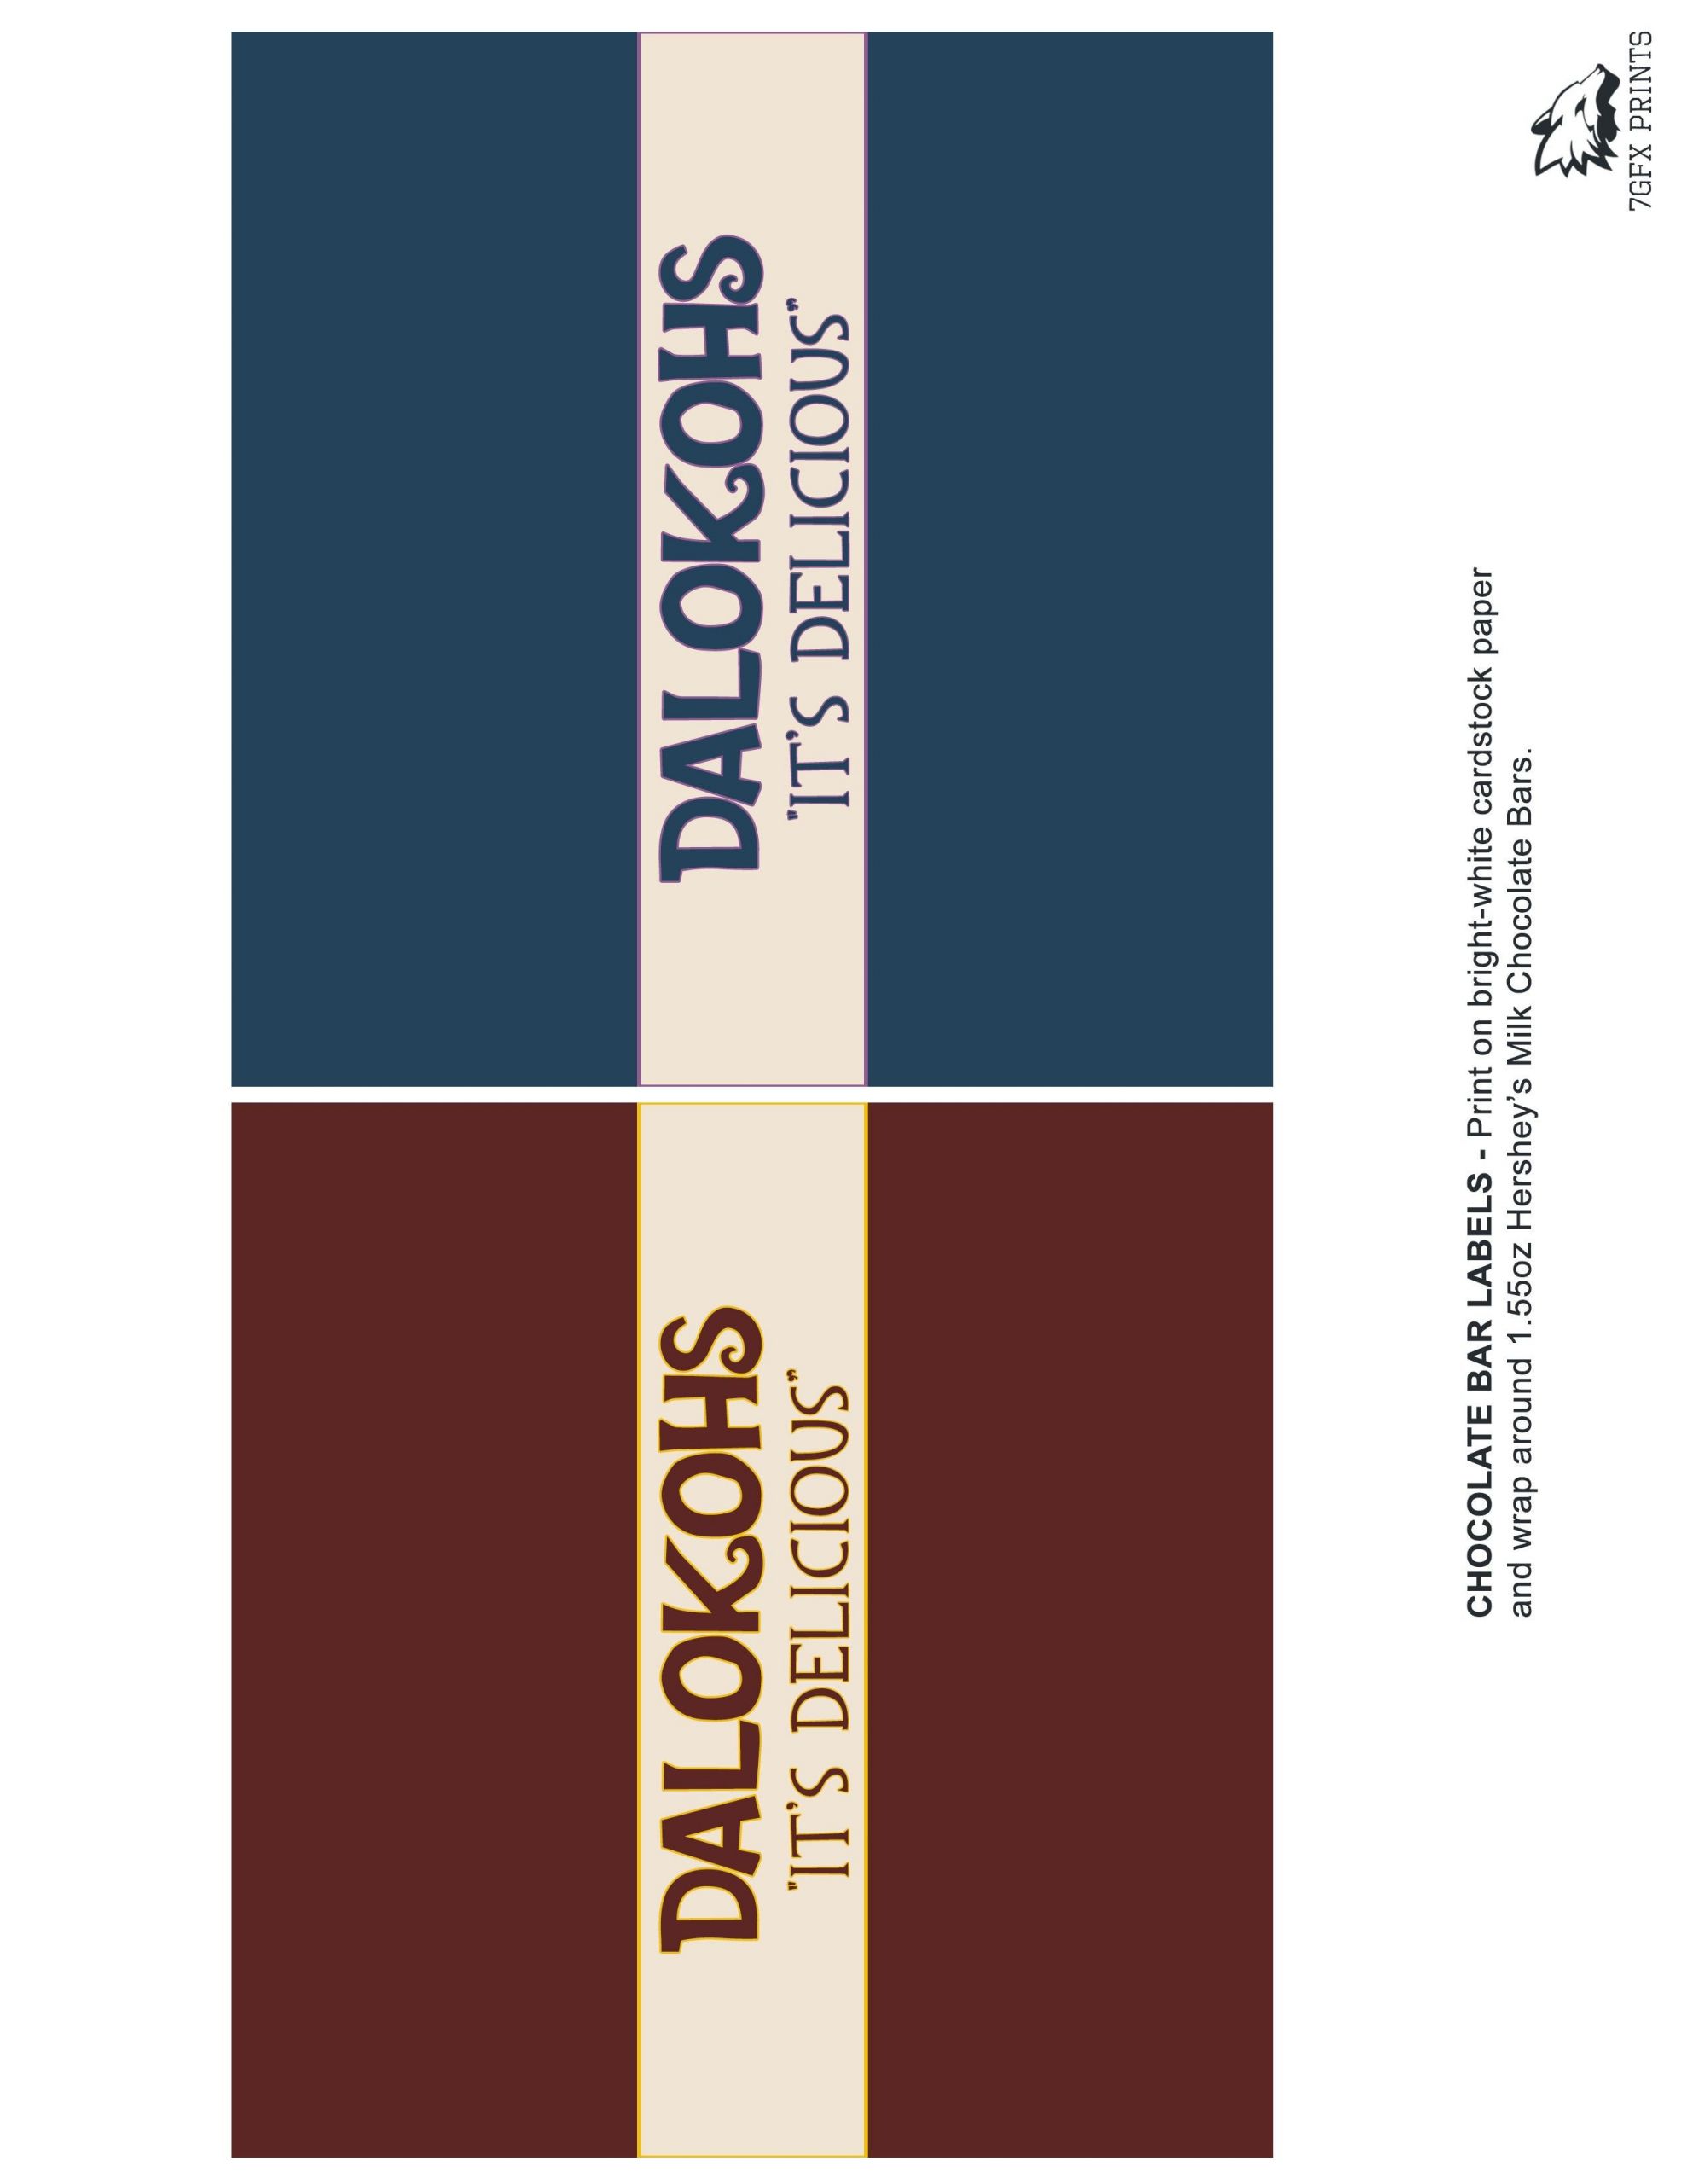 Team Fortress 2 Birthday Party Ideas
 Team Fortress 2 DALOKOHS Chocolate Bar Wrapper by KTL